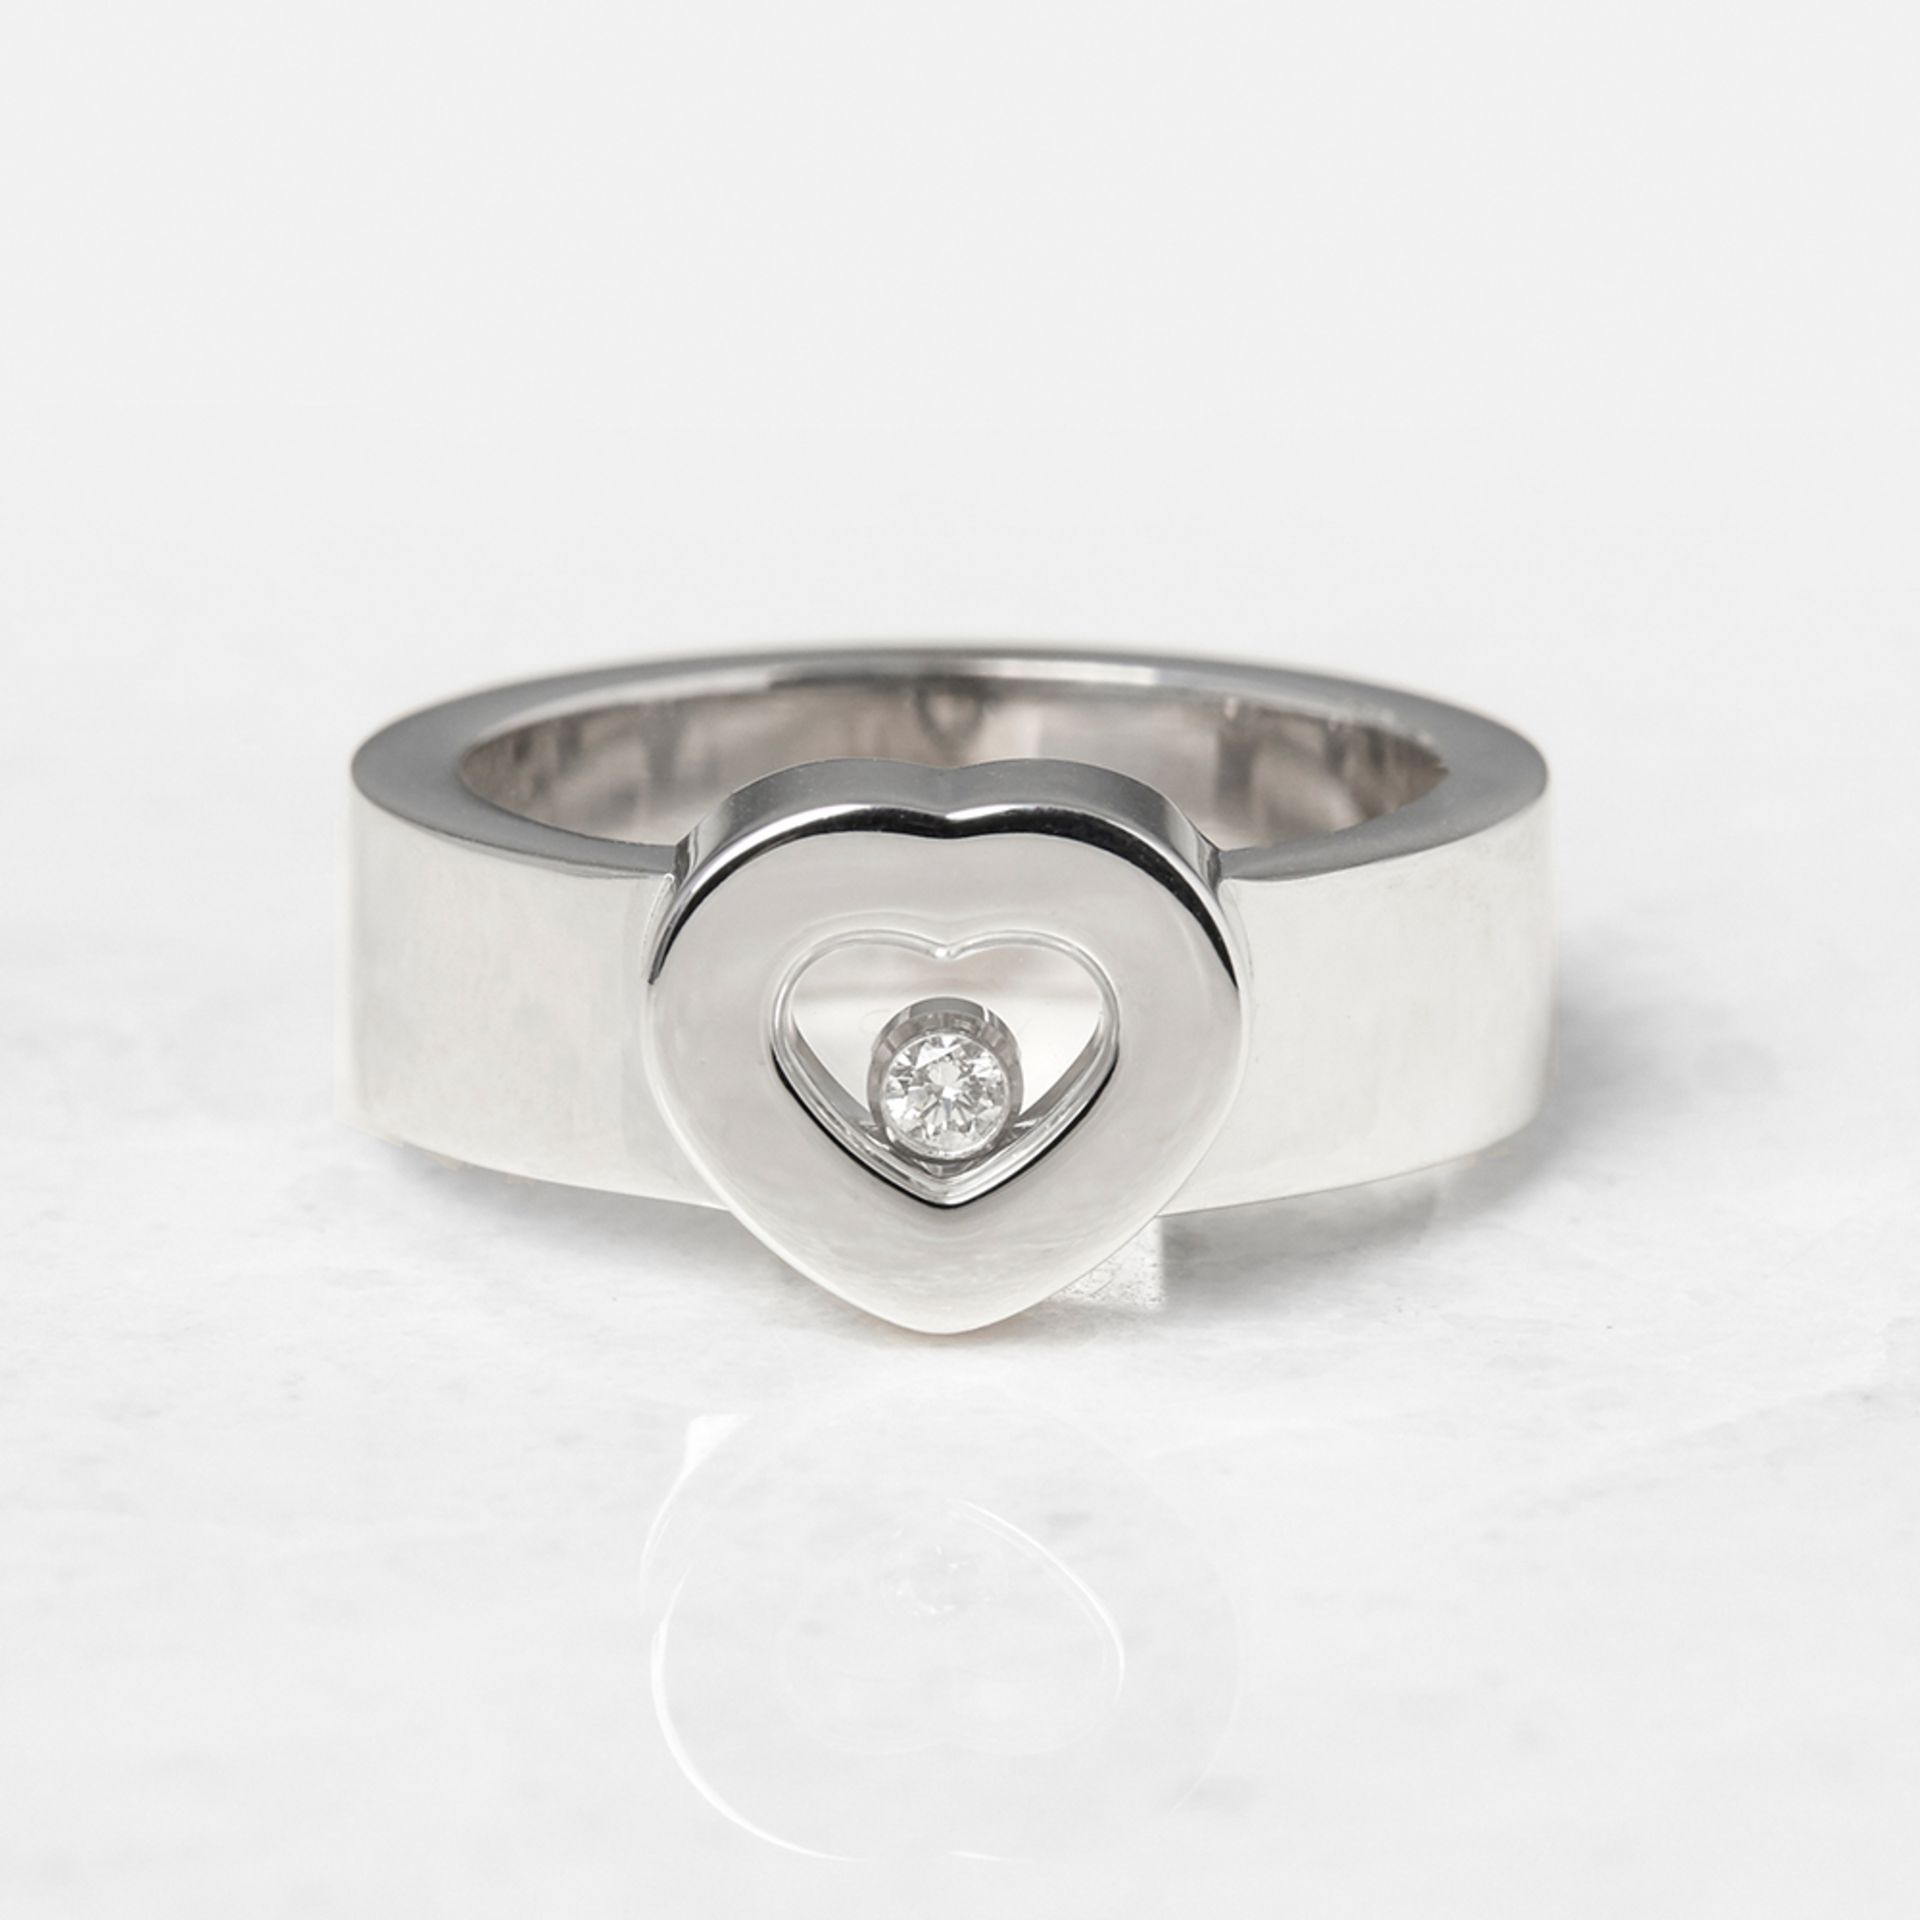 Chopard 18k White Gold Heart Happy Diamonds Ring Size M - Image 3 of 5